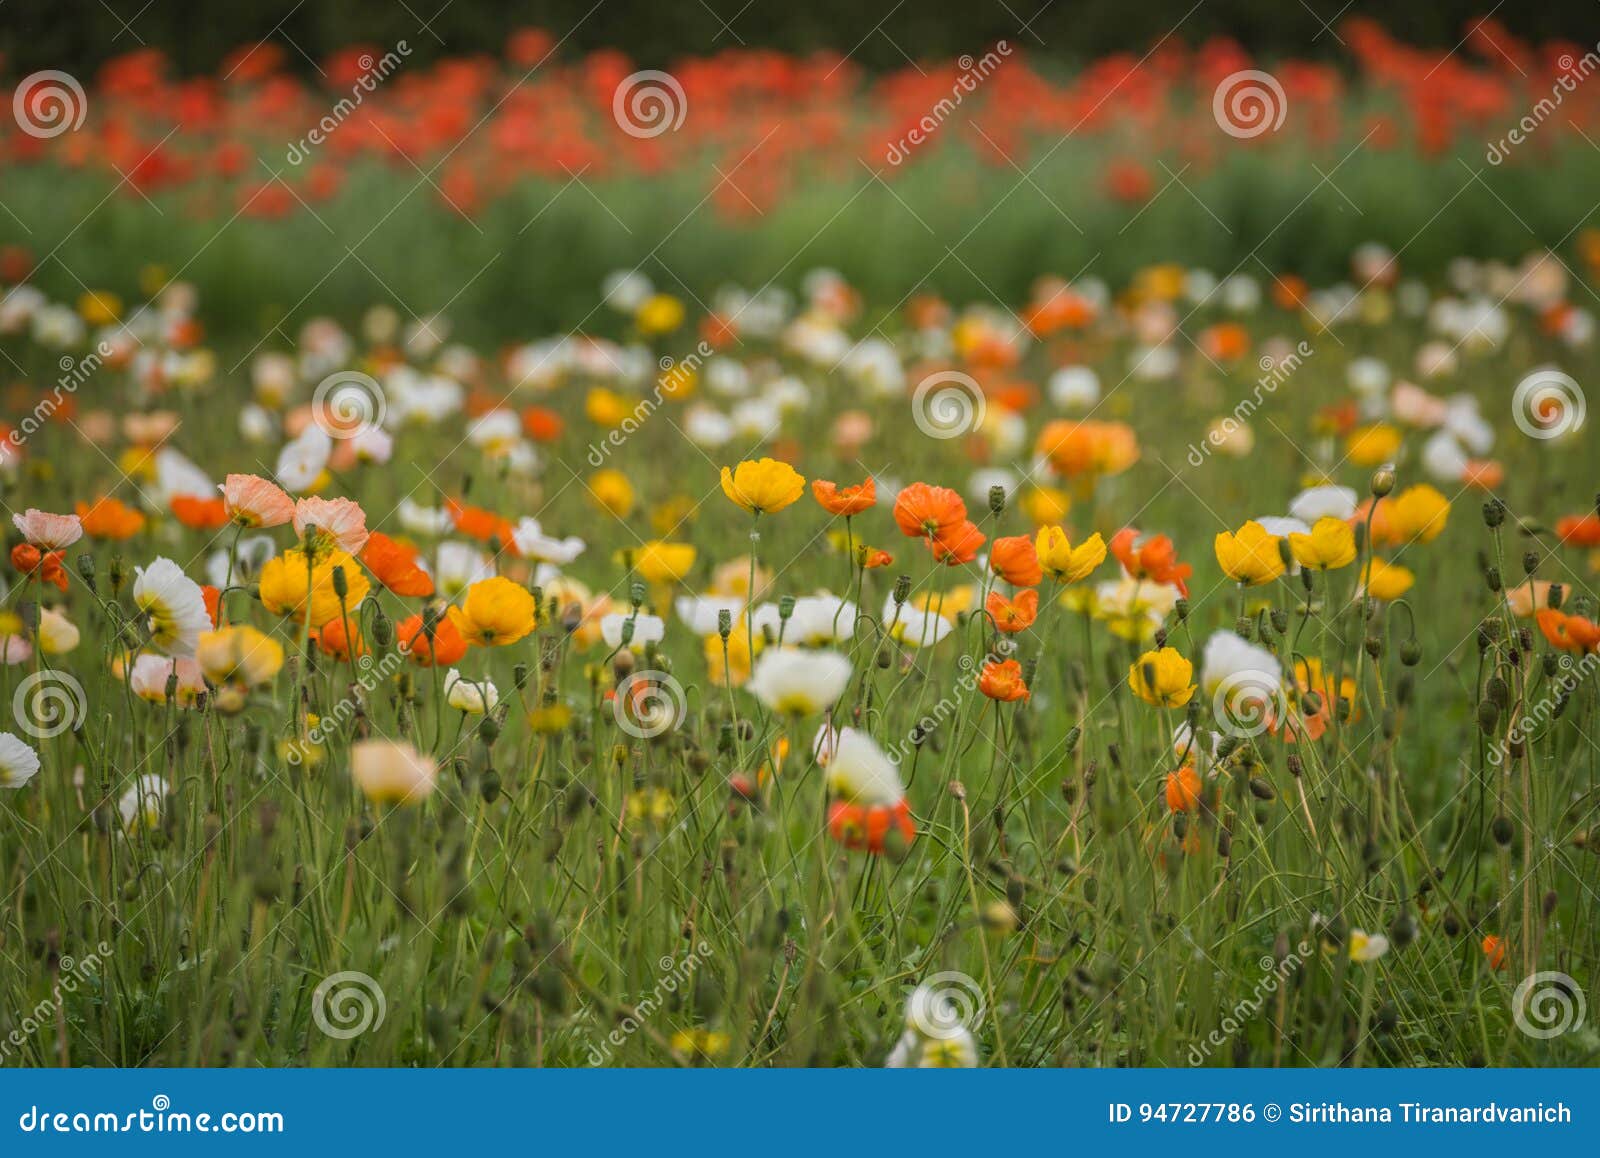 beautiful icelandic poppy field in different colors